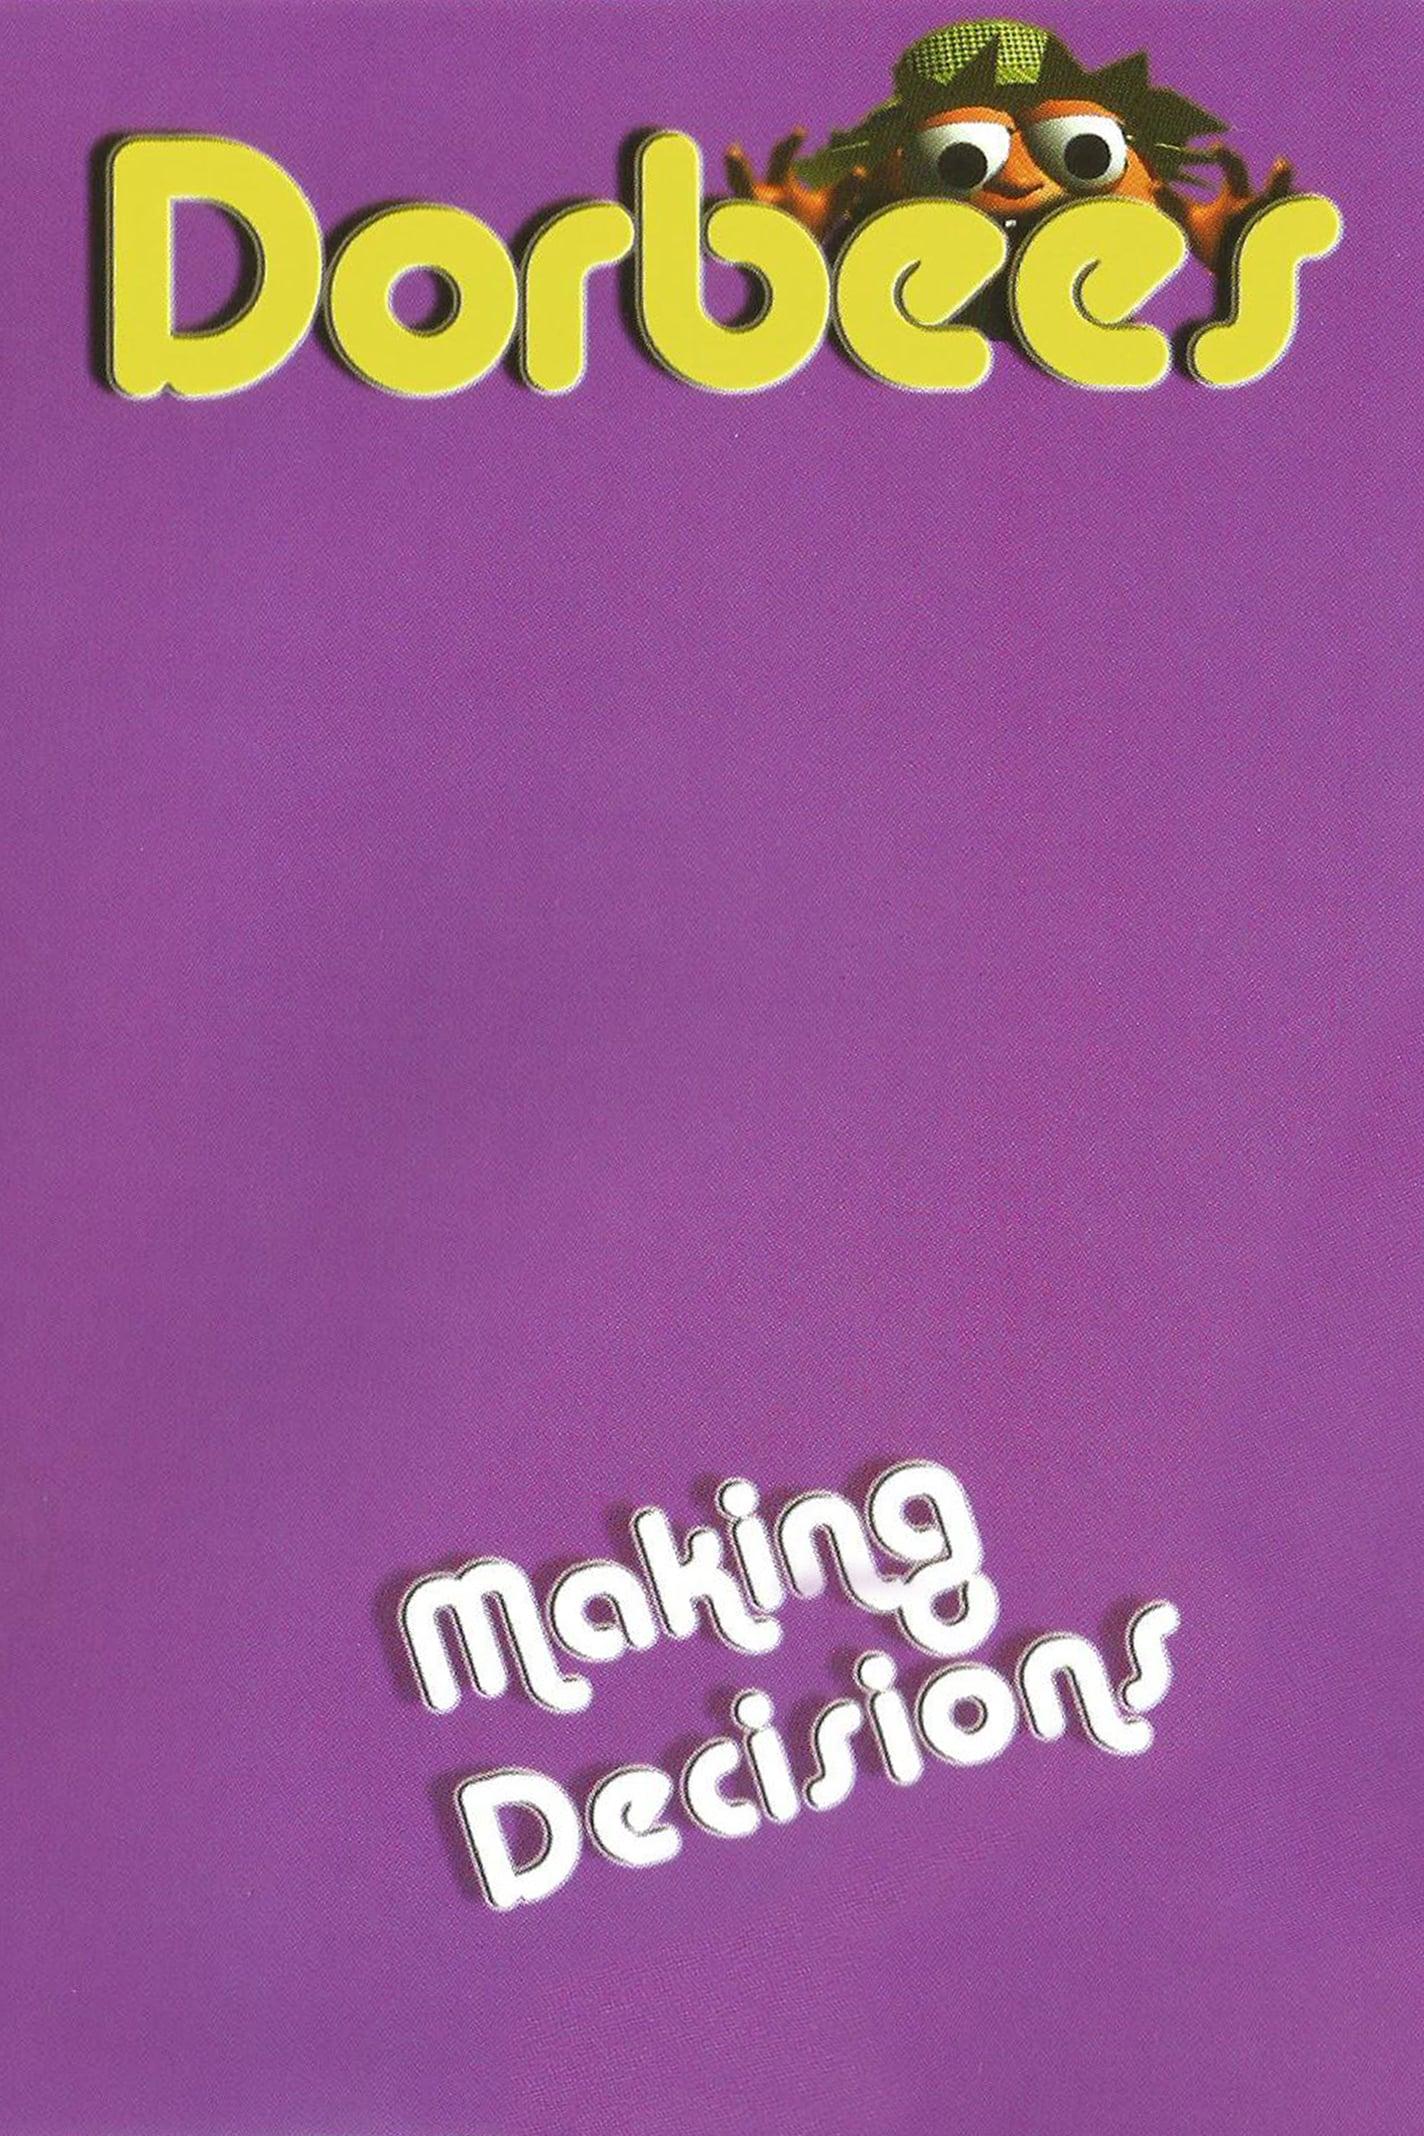 Dorbees: Making Decisions poster